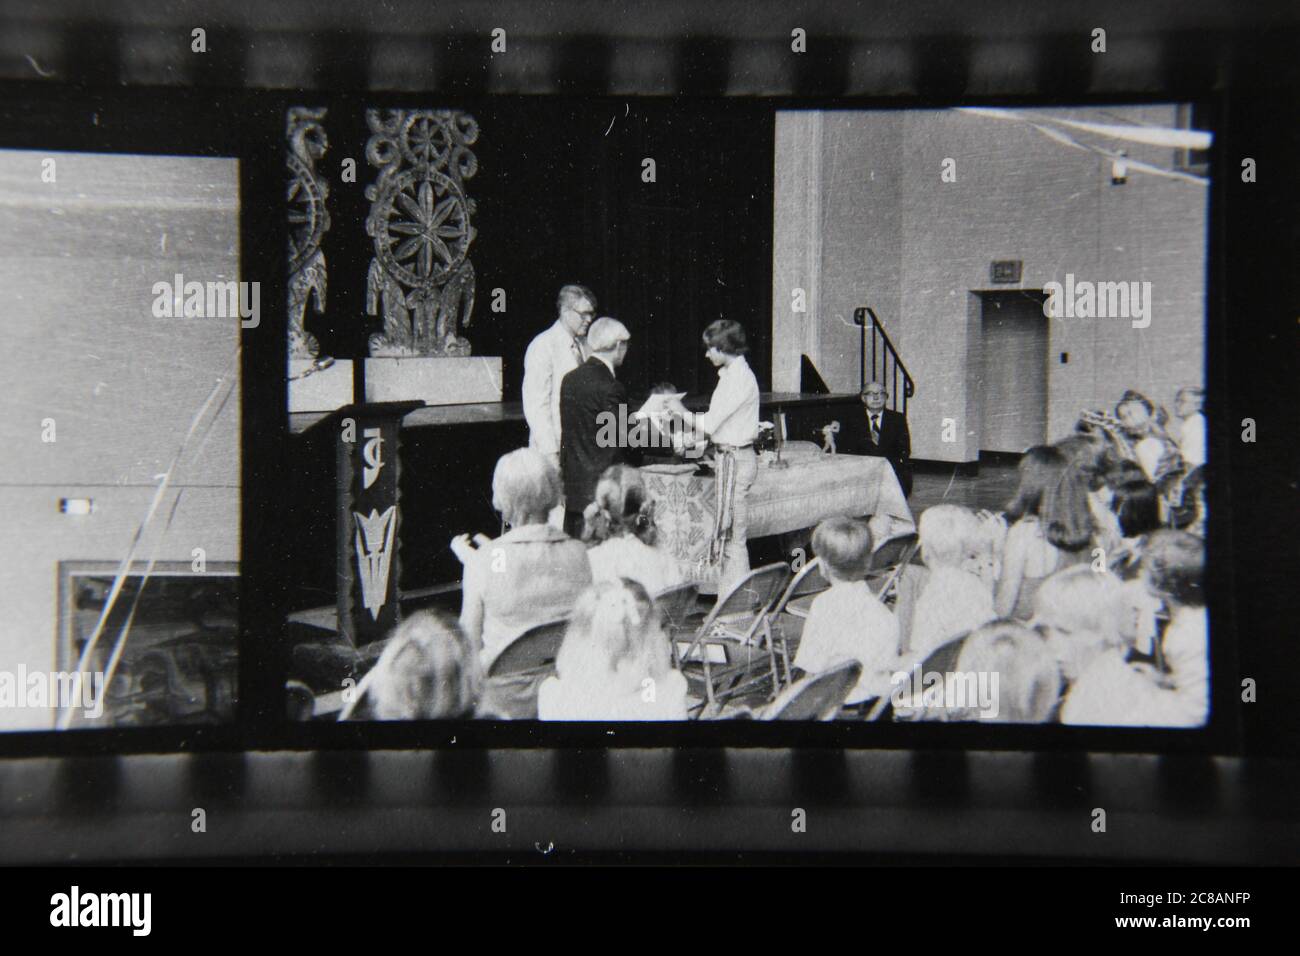 Fine 70s vintage contact print black and white photography of an awards presentation ceremony. Stock Photo